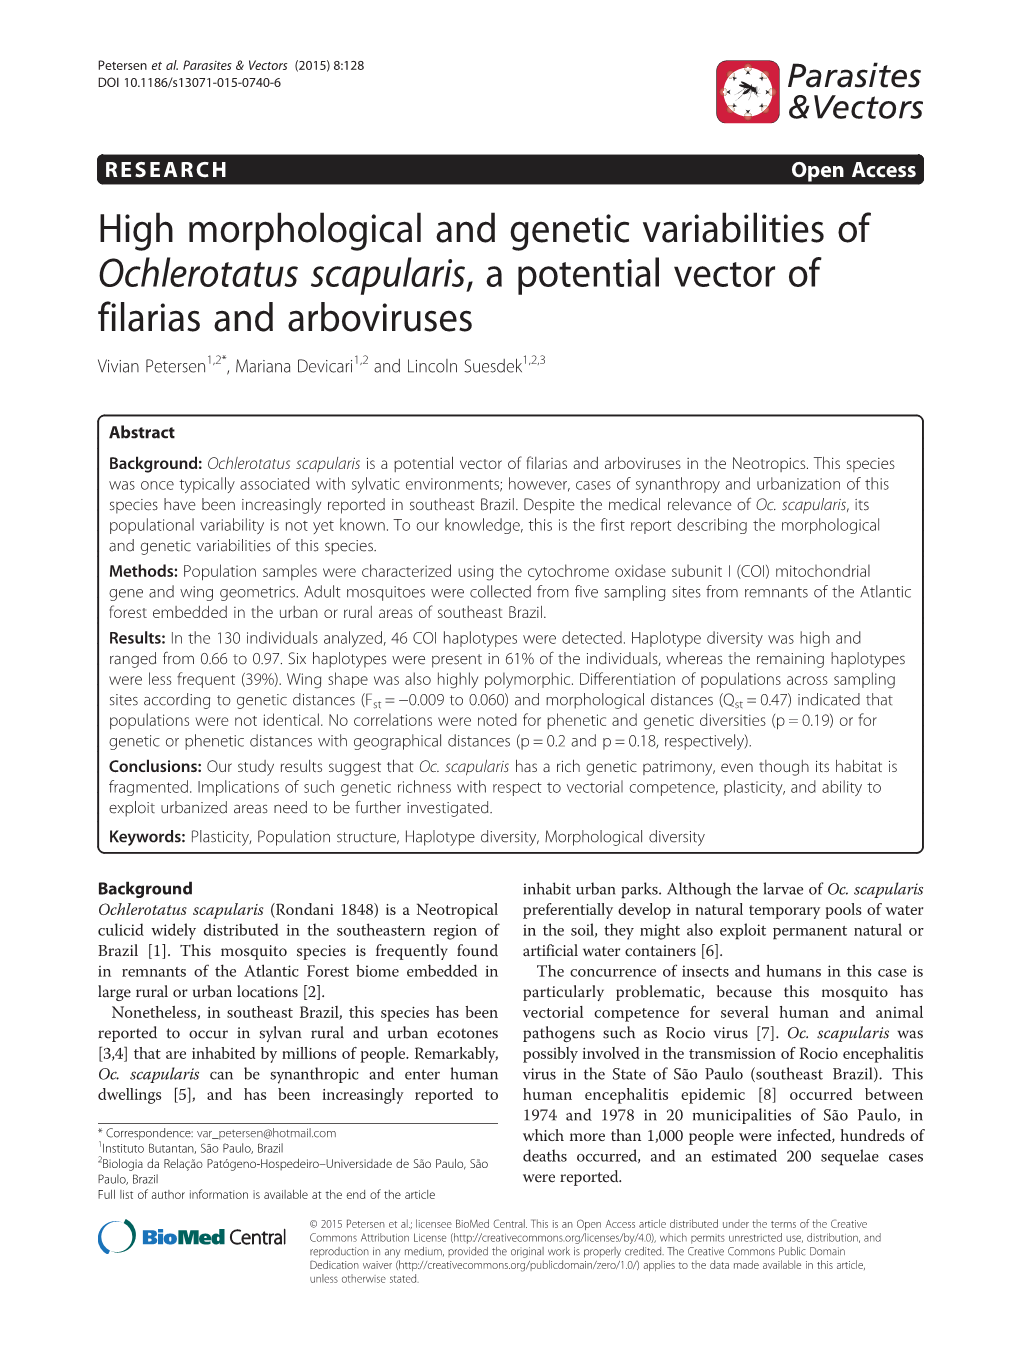 High Morphological and Genetic Variabilities of Ochlerotatus Scapularis, a Potential Vector of Filarias and Arboviruses